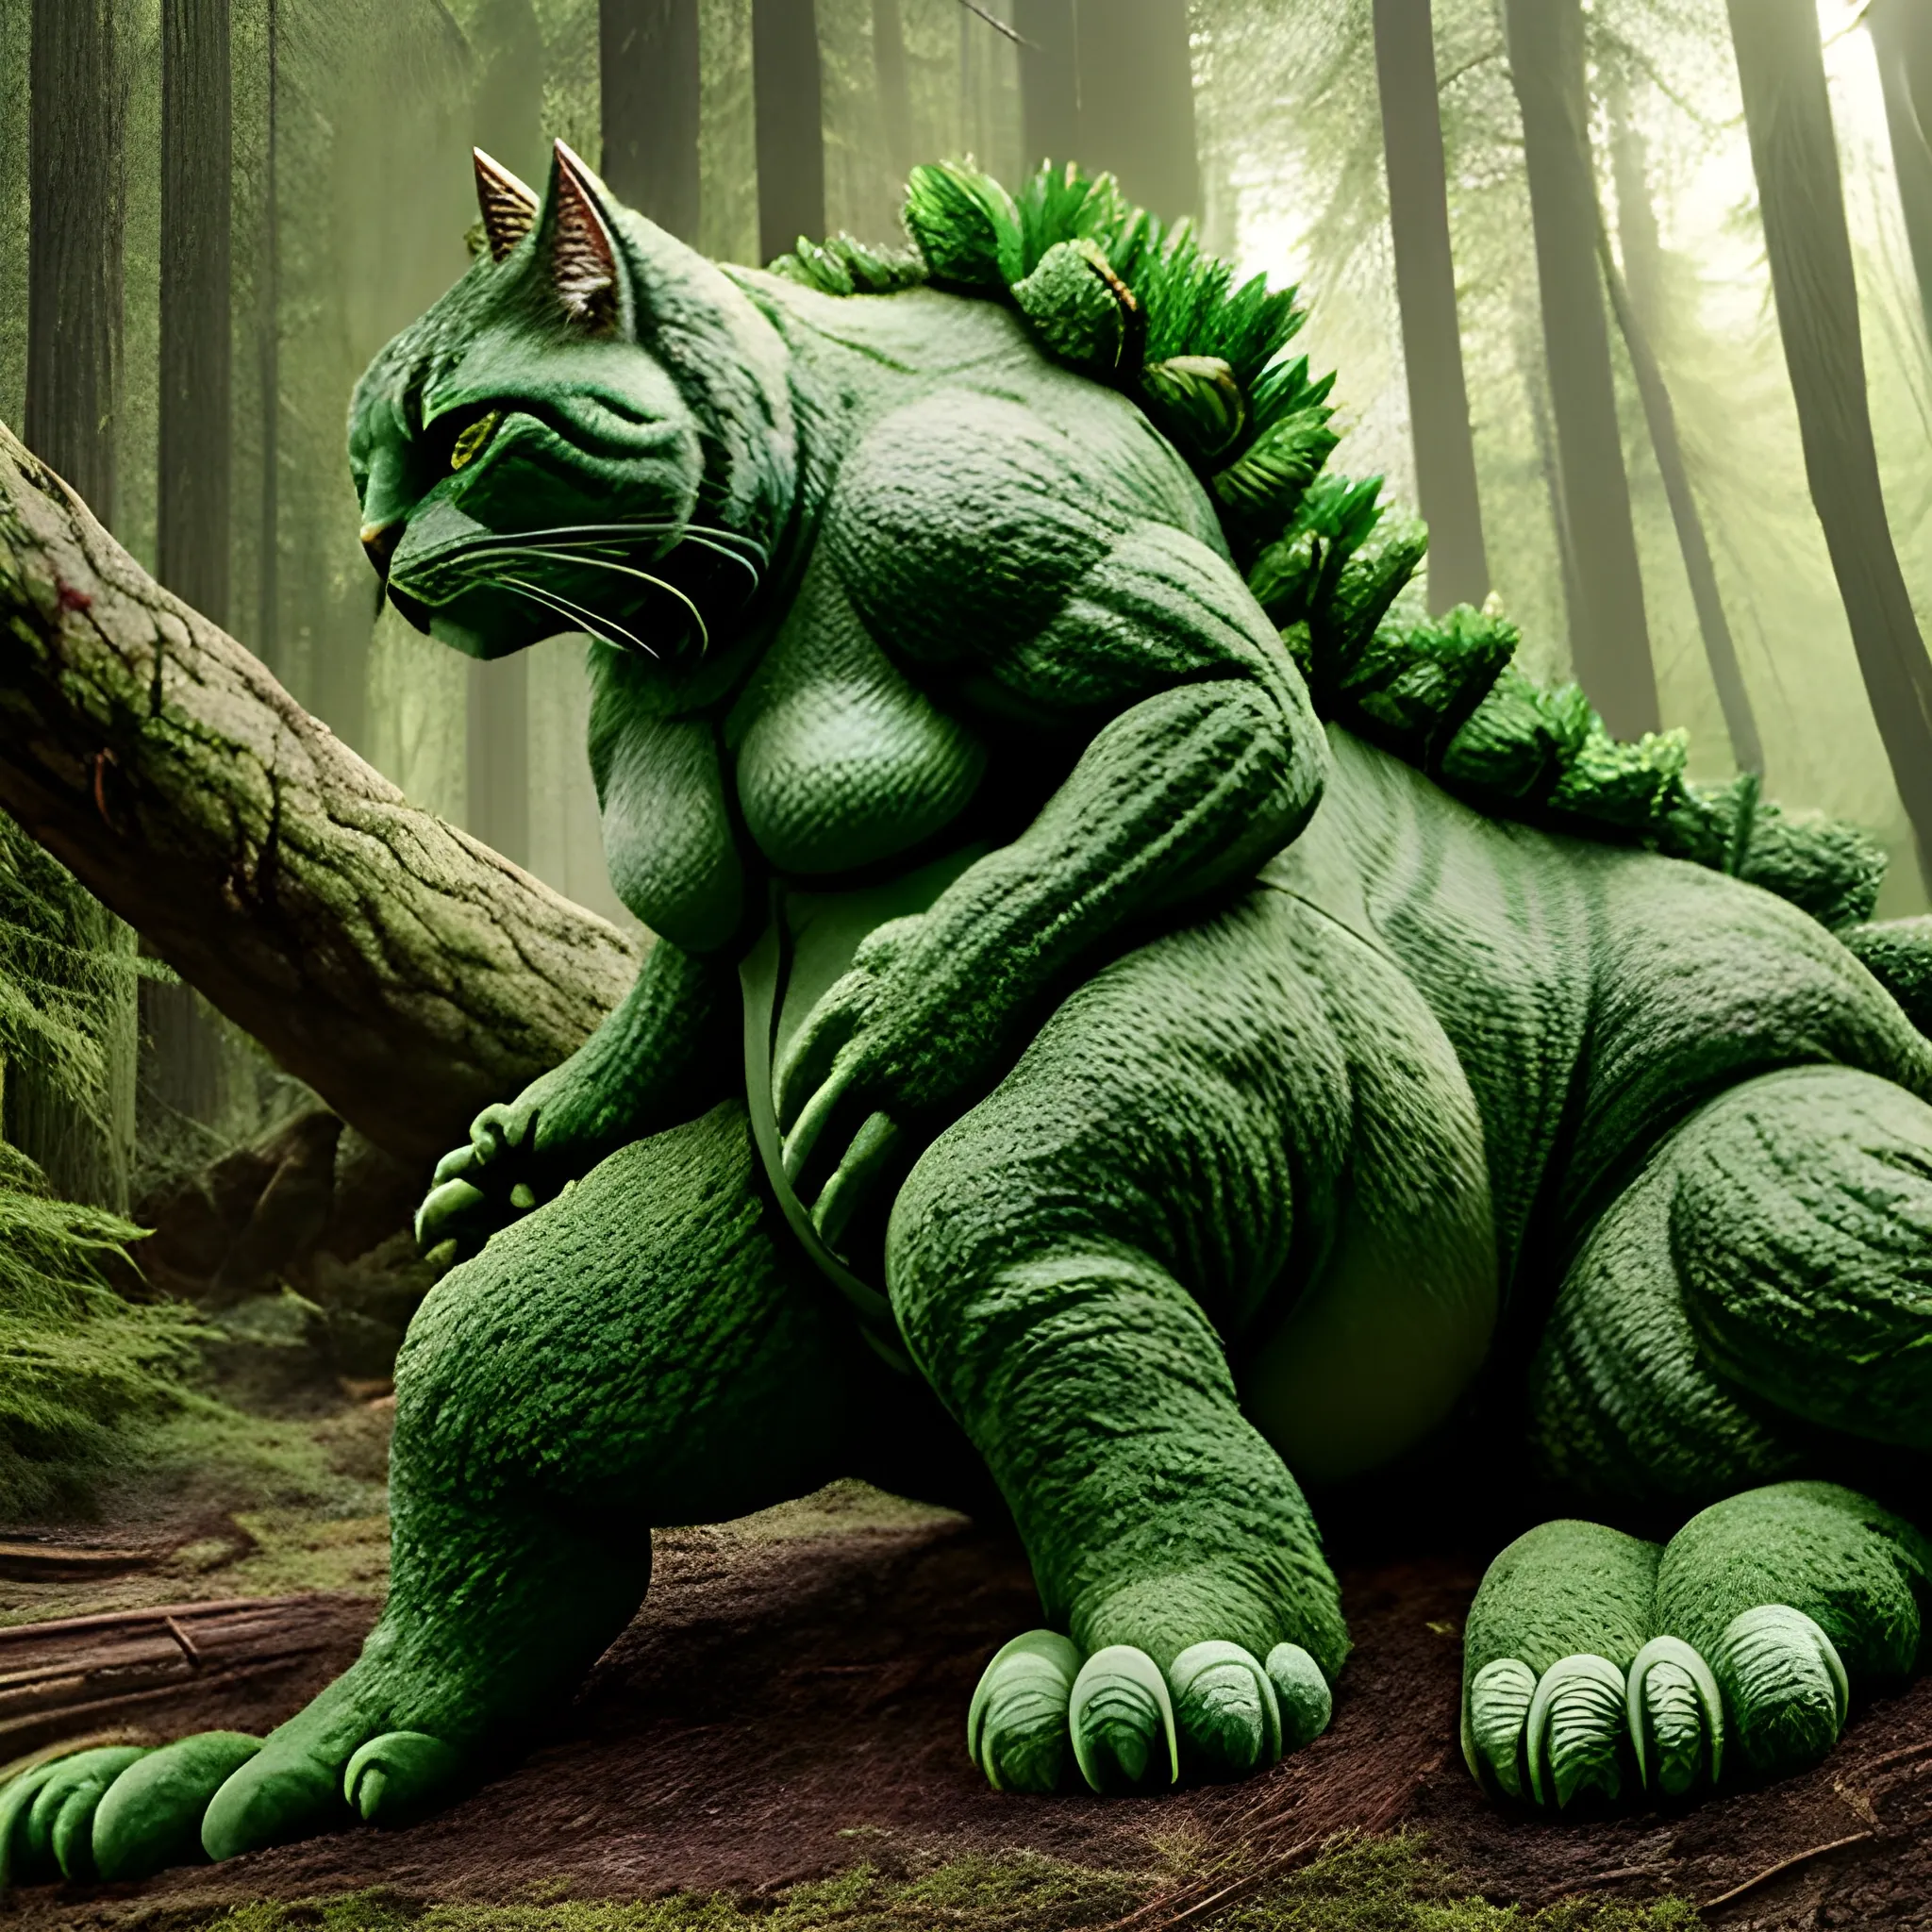 In the sunny forest, there is a very tall and strong "green cat" with very developed muscles is standing on  Godzilla body,Godzilla is  lying on the ground with wounds all over his body. Surreal photos and ultra-real details.